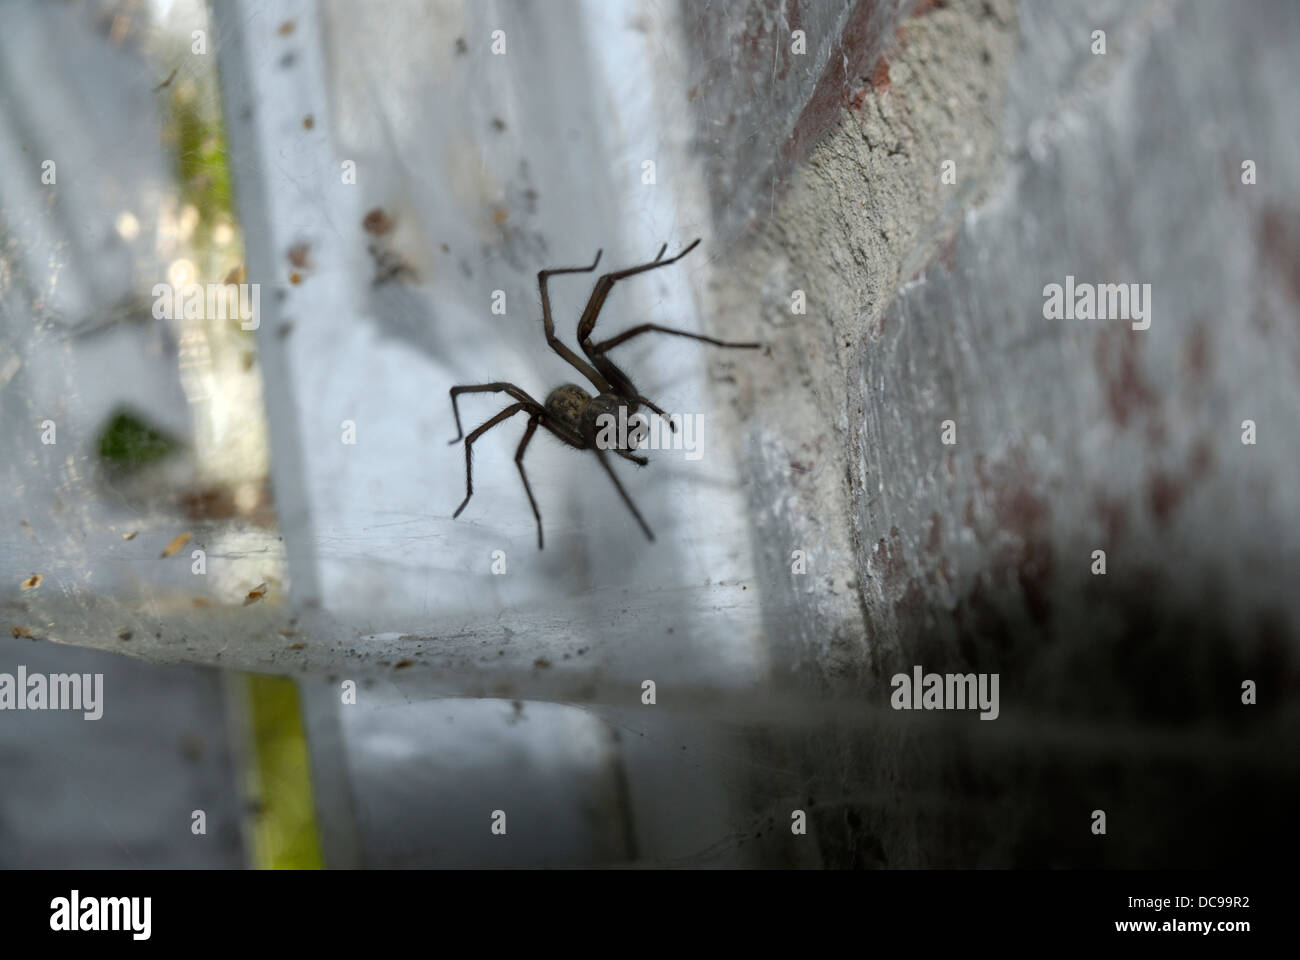 A large male Garden Spider on it's web Stock Photo